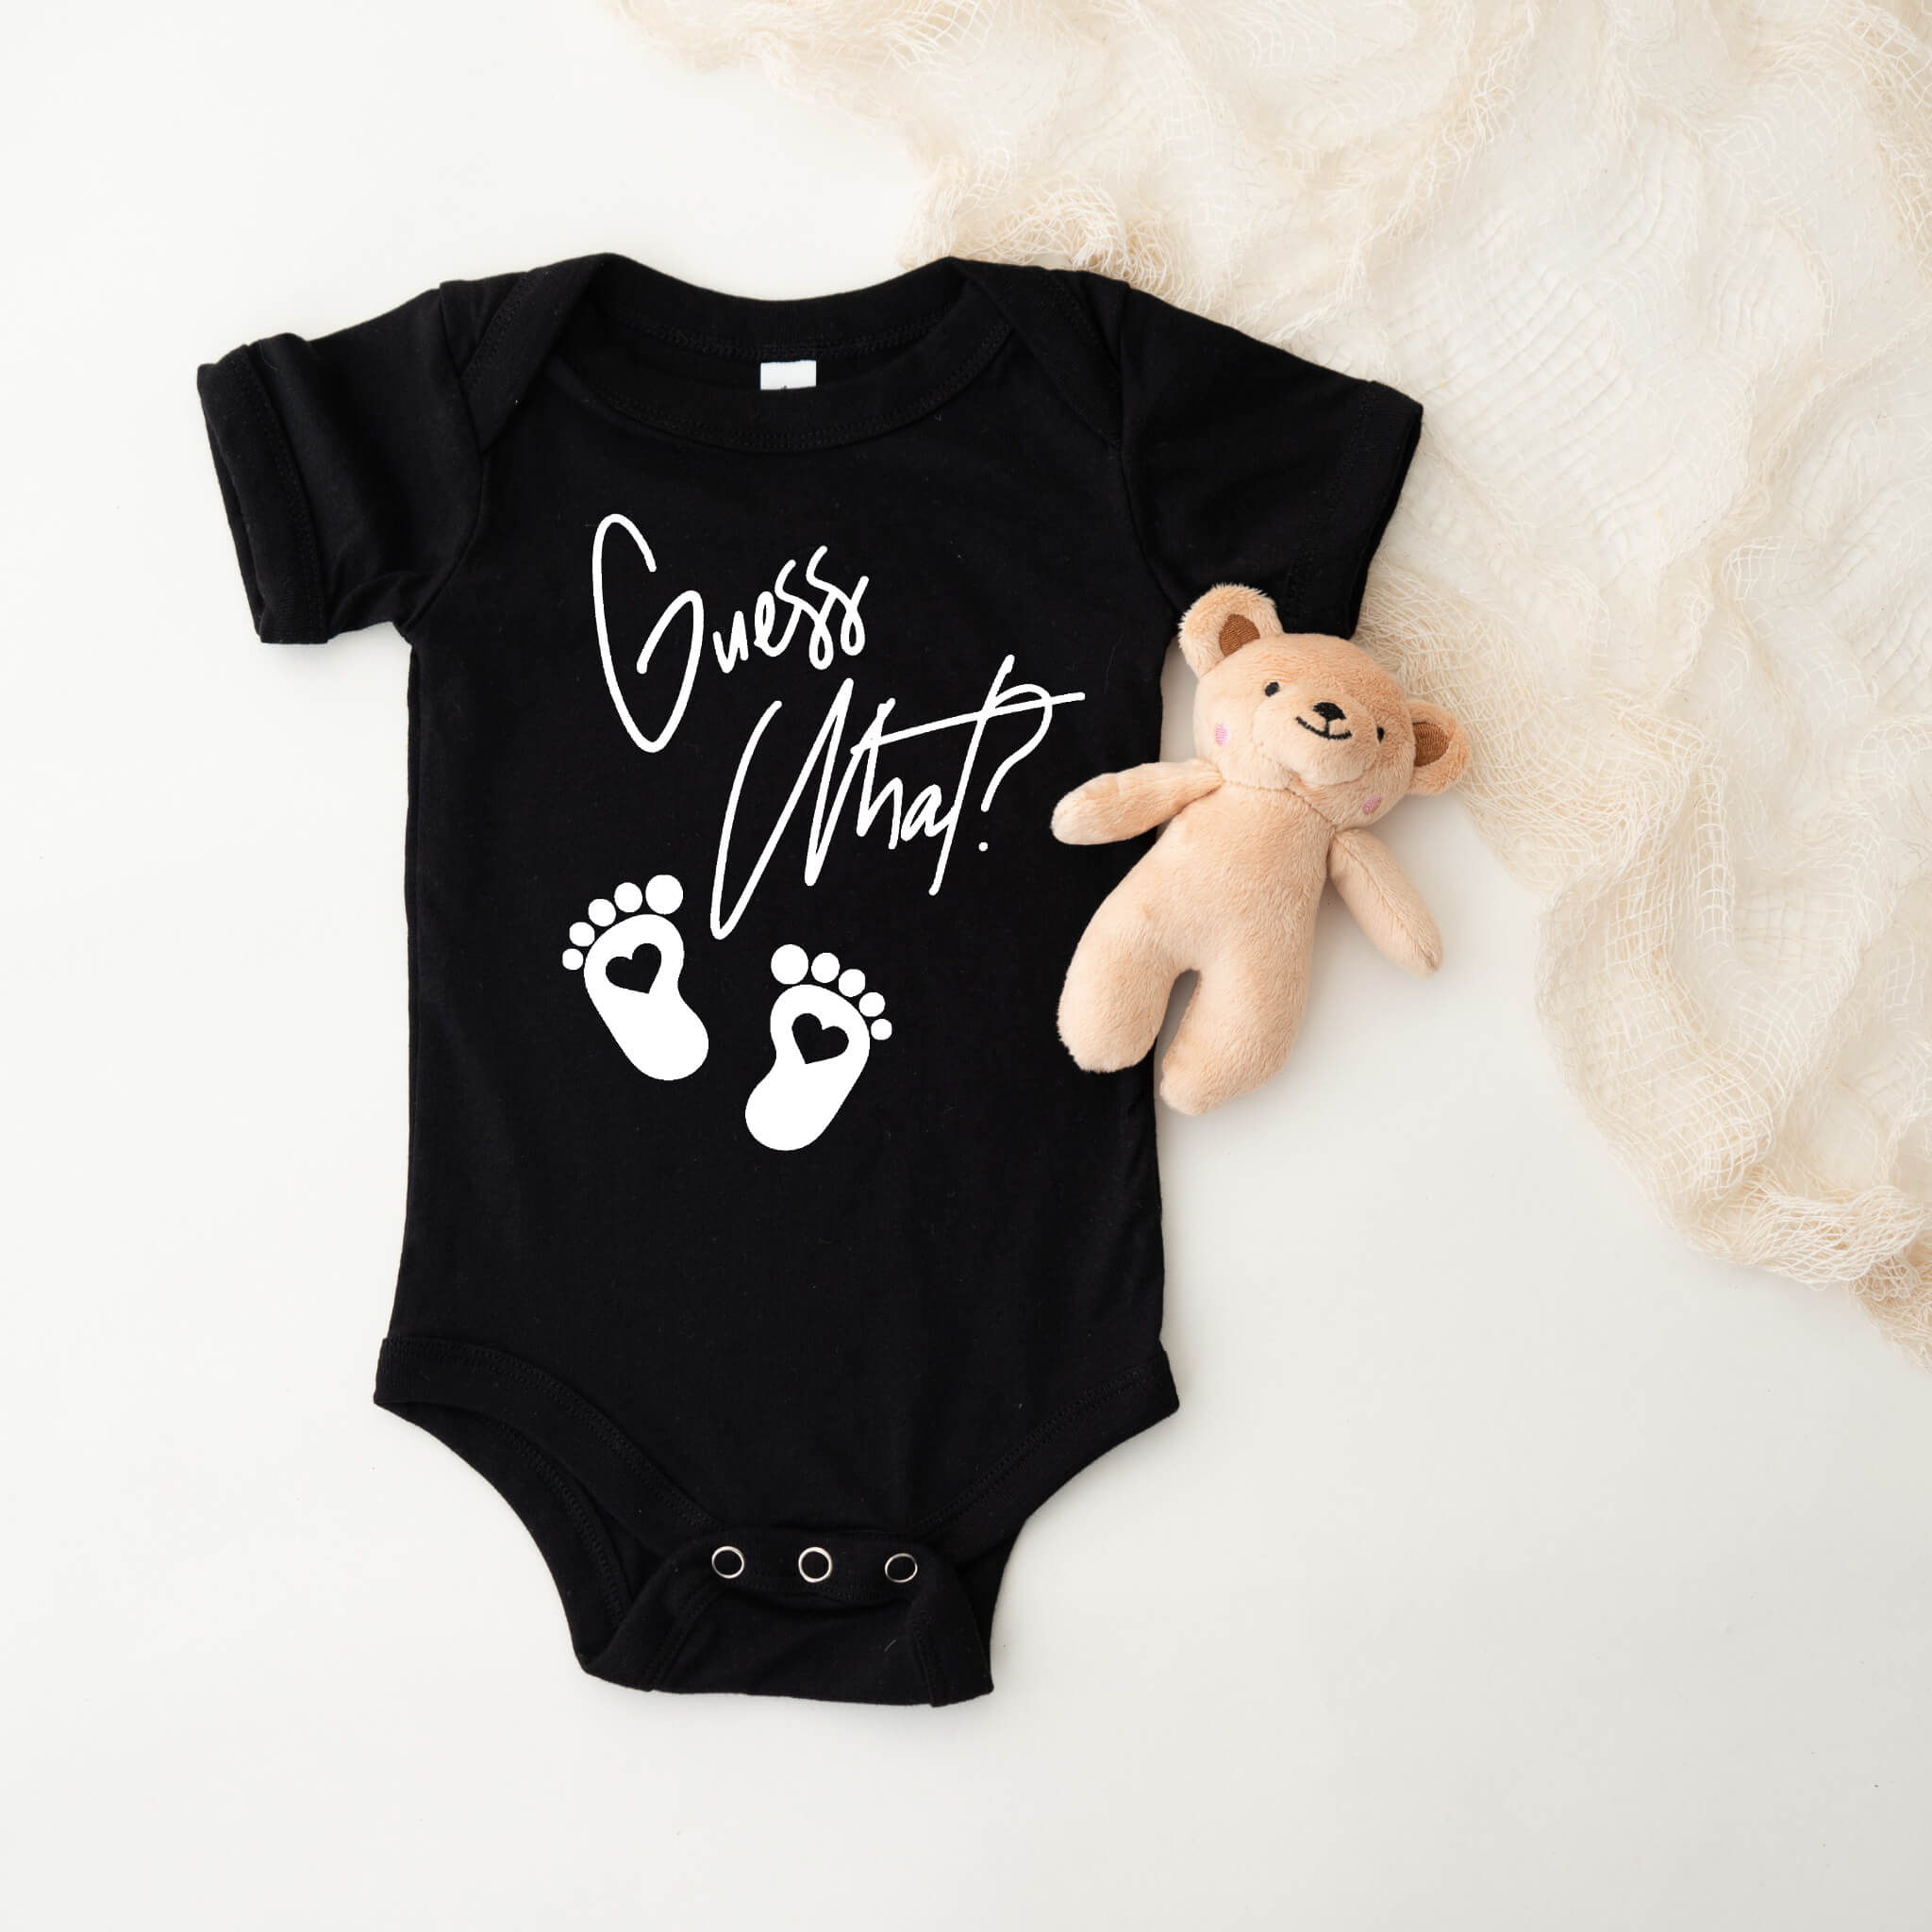 Will You Be My Mimi Onesie ®, Baby Announcement Onesie ®, Pregnancy  Announcement Onesie ®, Baby Surprise Bodysuit, Baby Reveal Shirt 